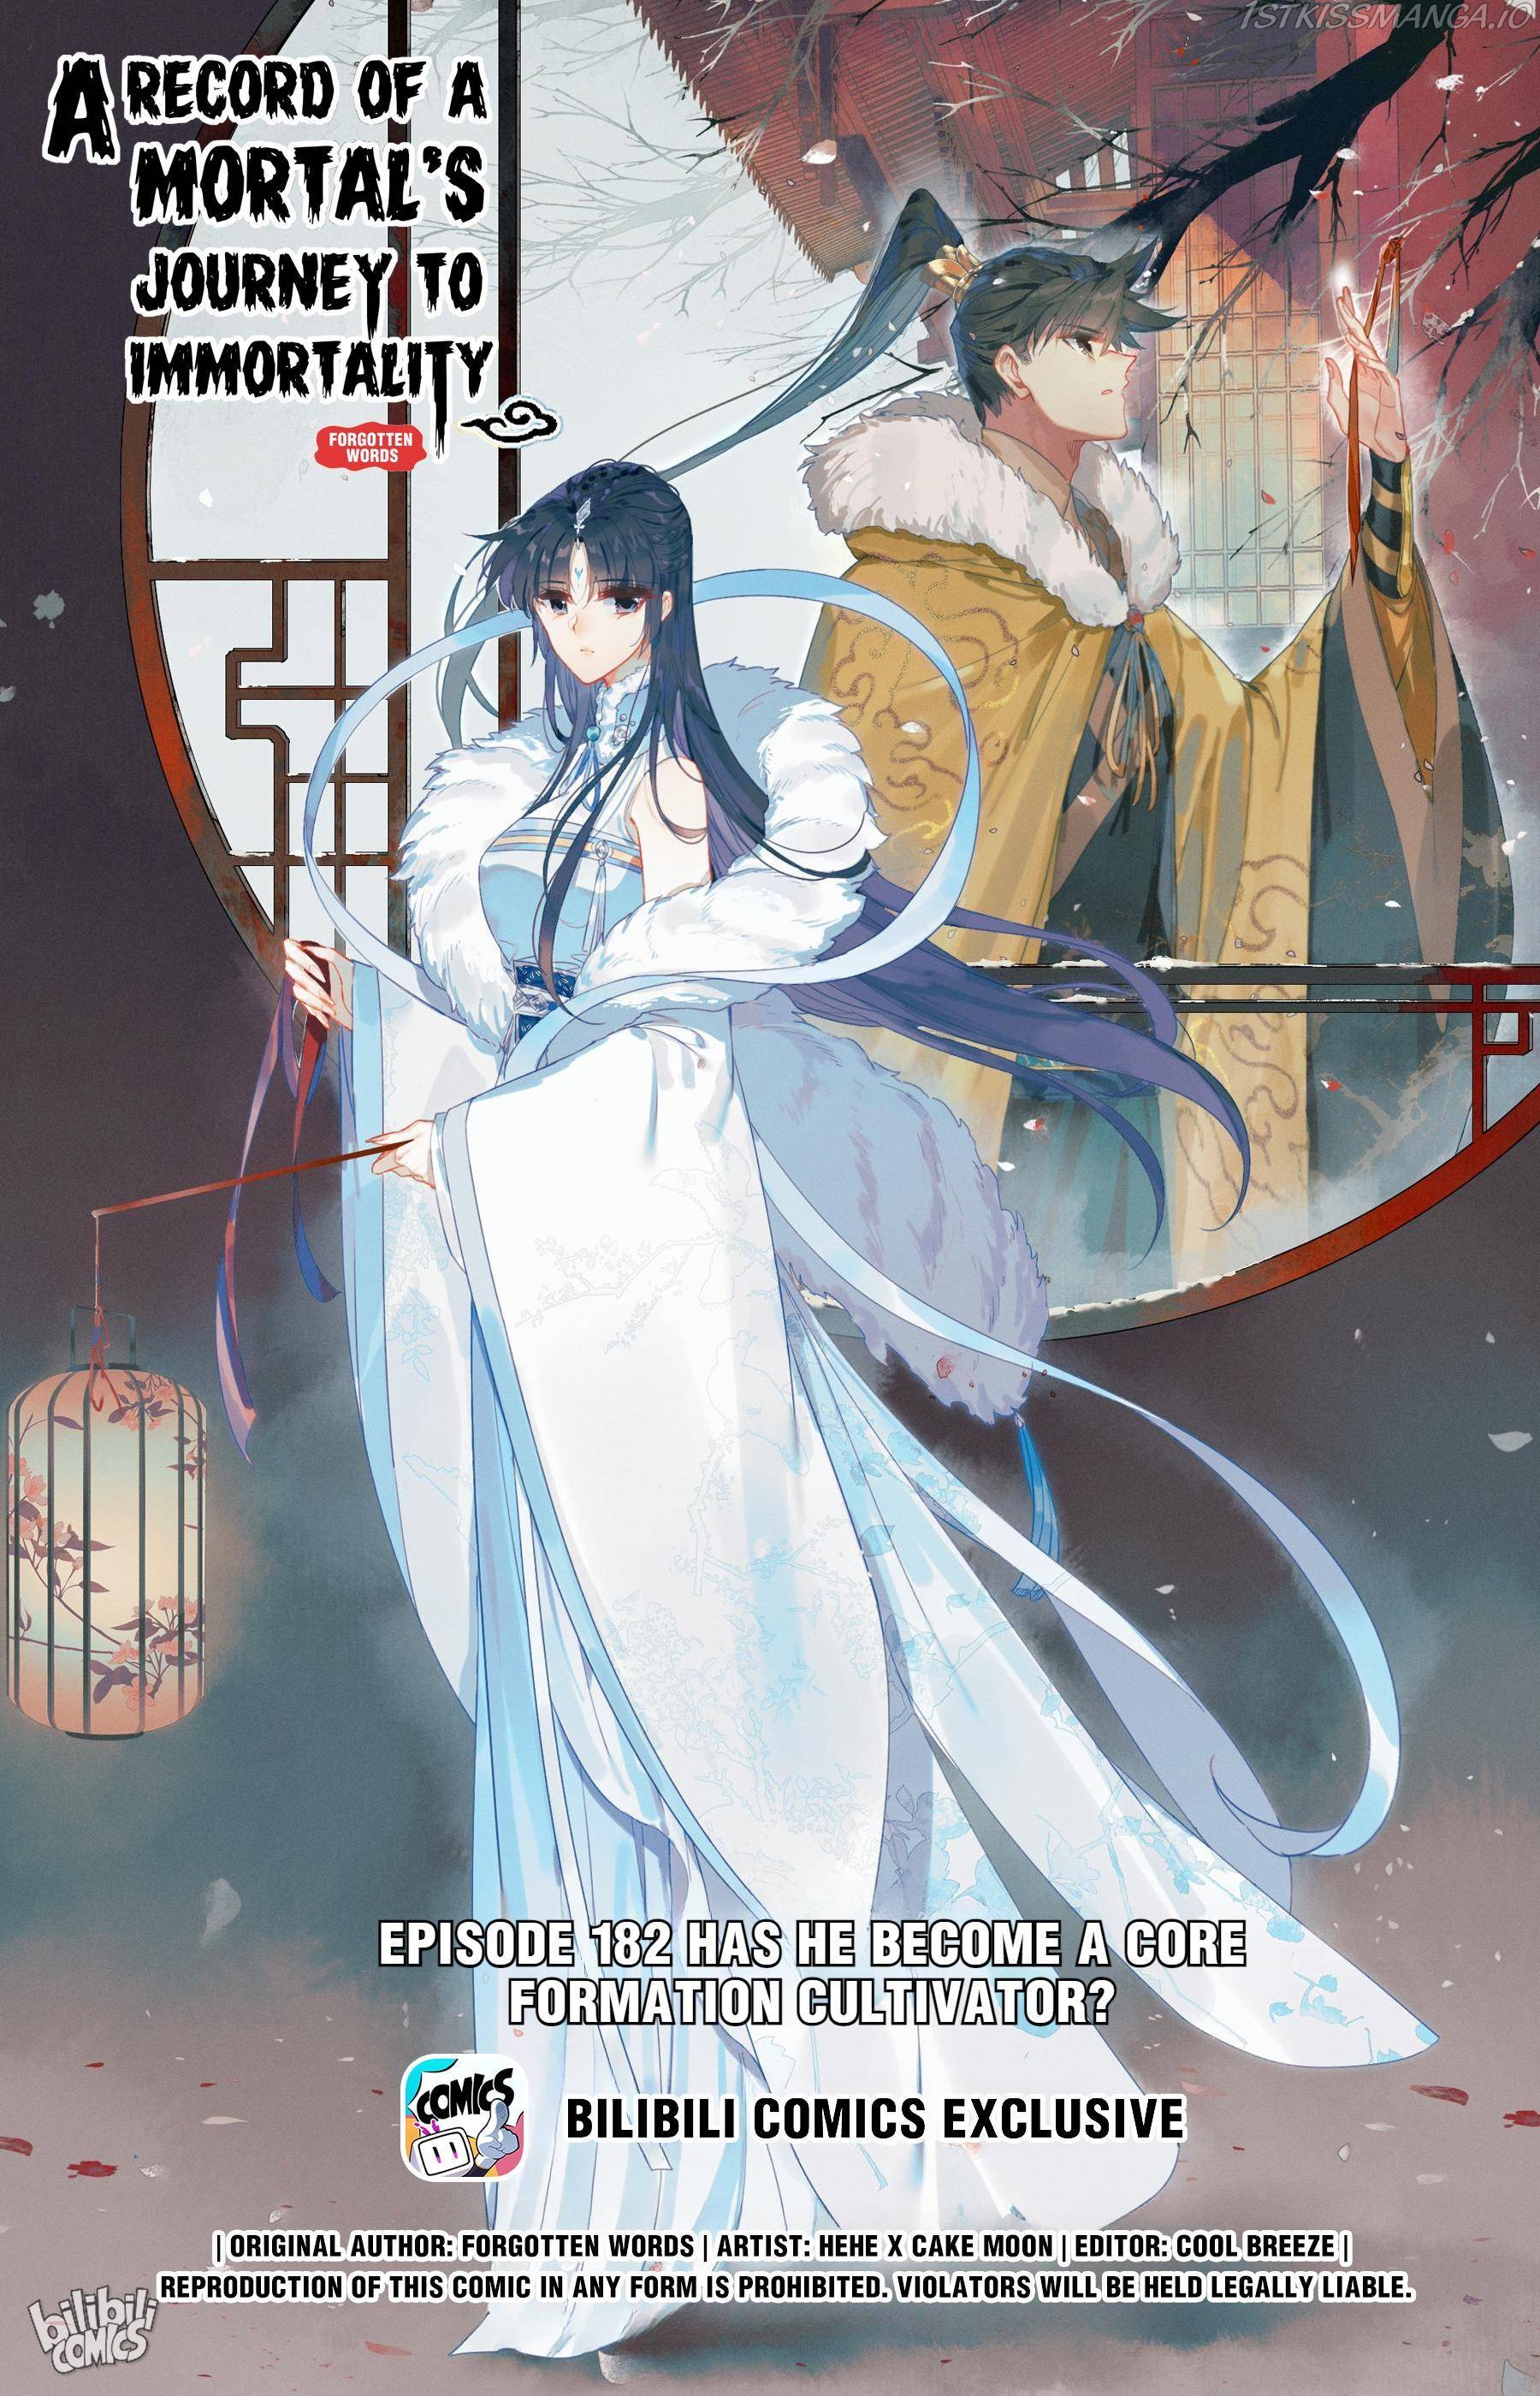 Mortal's Cultivation: journey to immortality Chapter 182